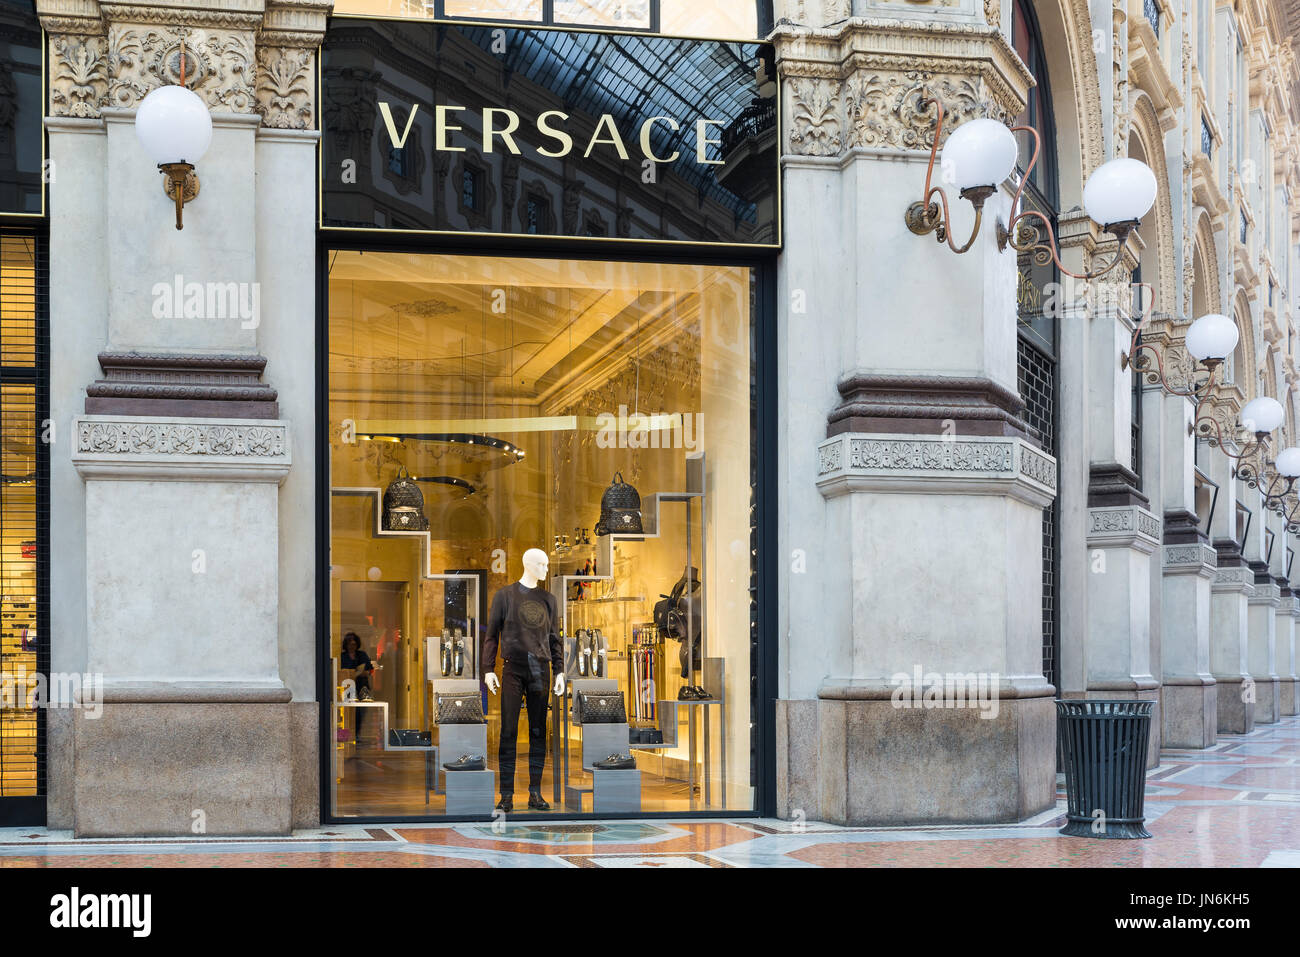 Versace Boutique High Resolution Stock Photography and Images - Alamy